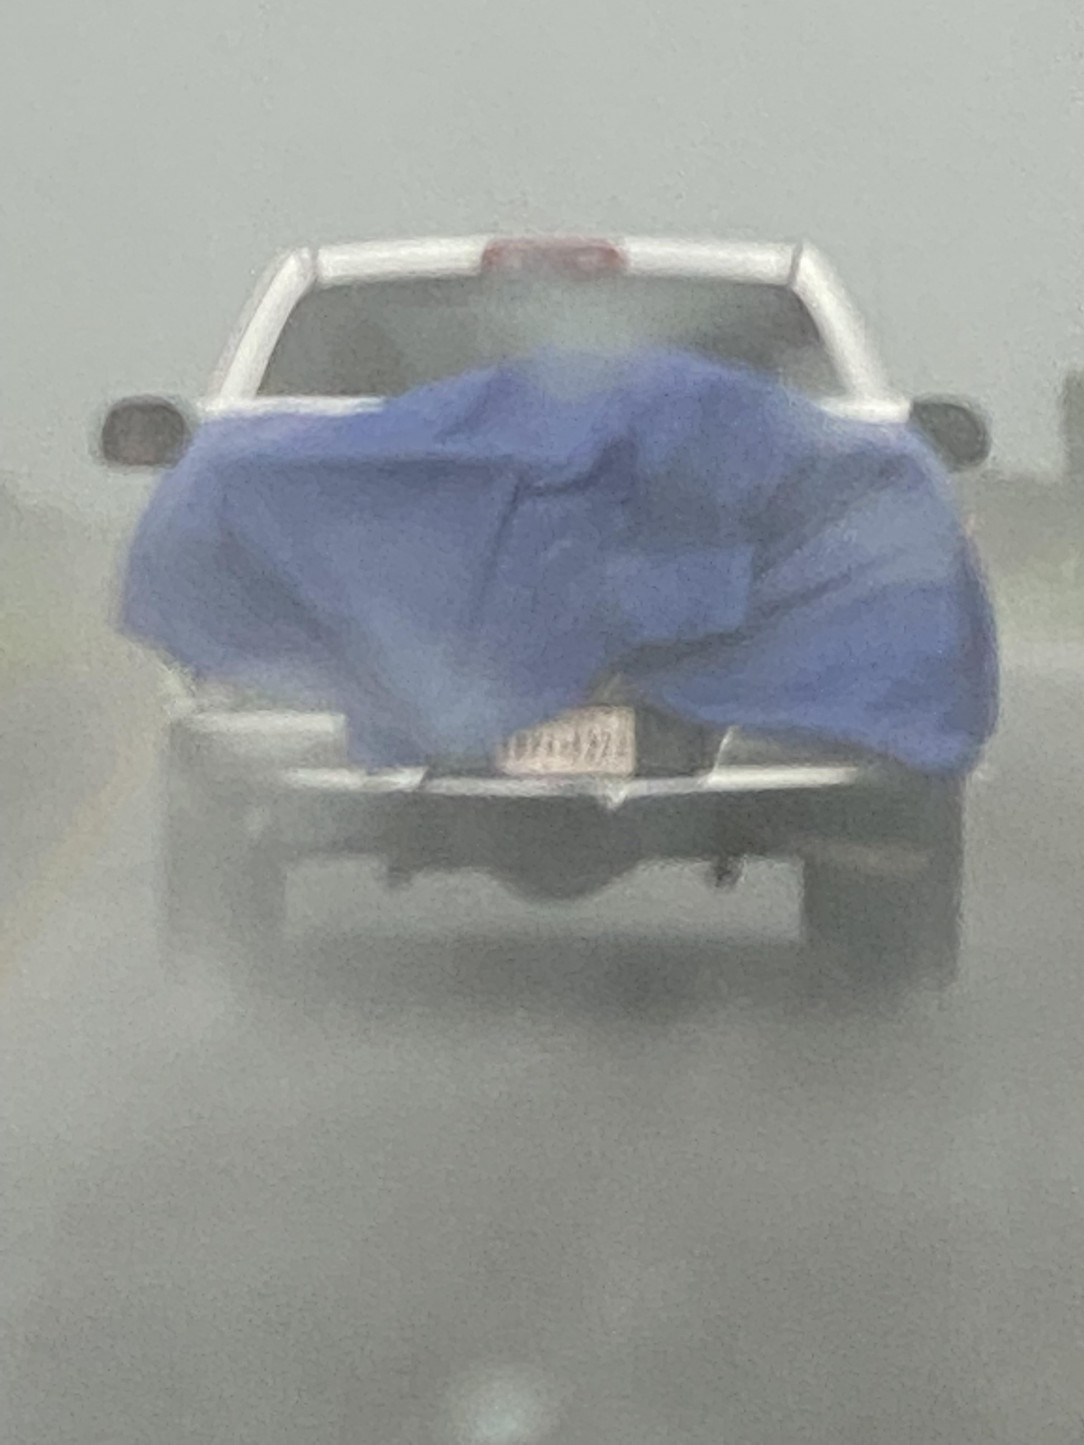 “Idiot blocked his brake lights during a storm, and the top light was busted”